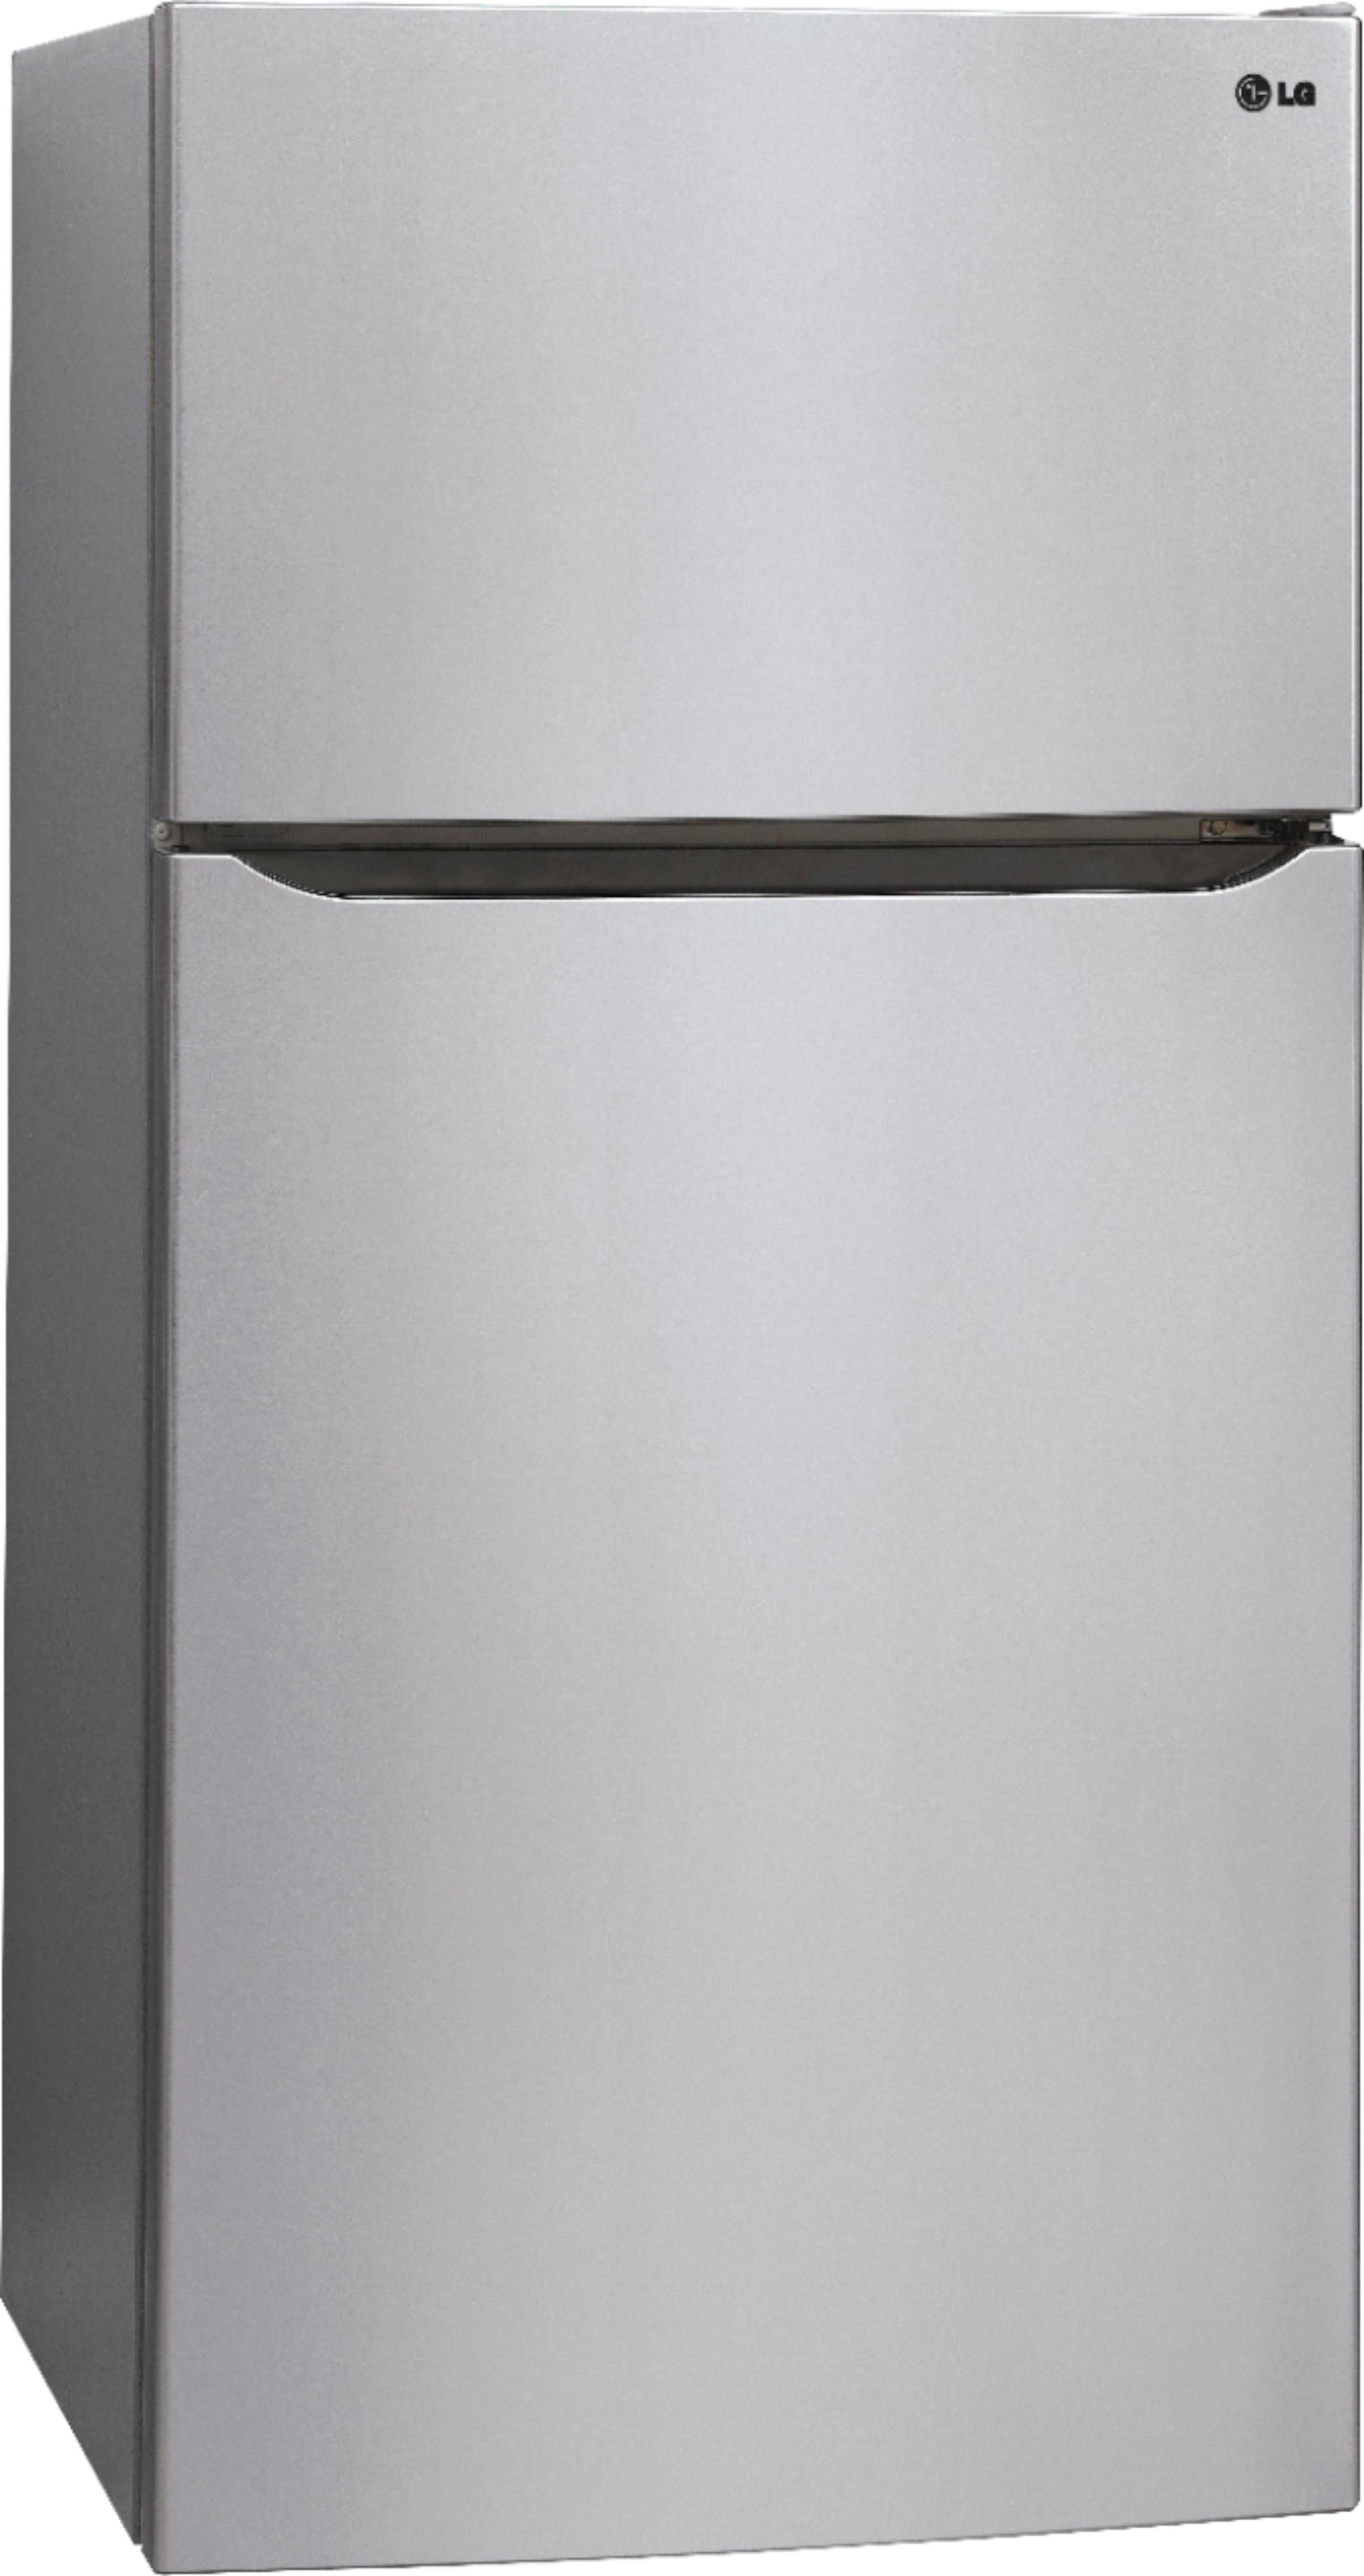 Angle View: LG - 23.8 Cu. Ft. Top-Freezer Refrigerator with Ice Maker - Stainless Steel